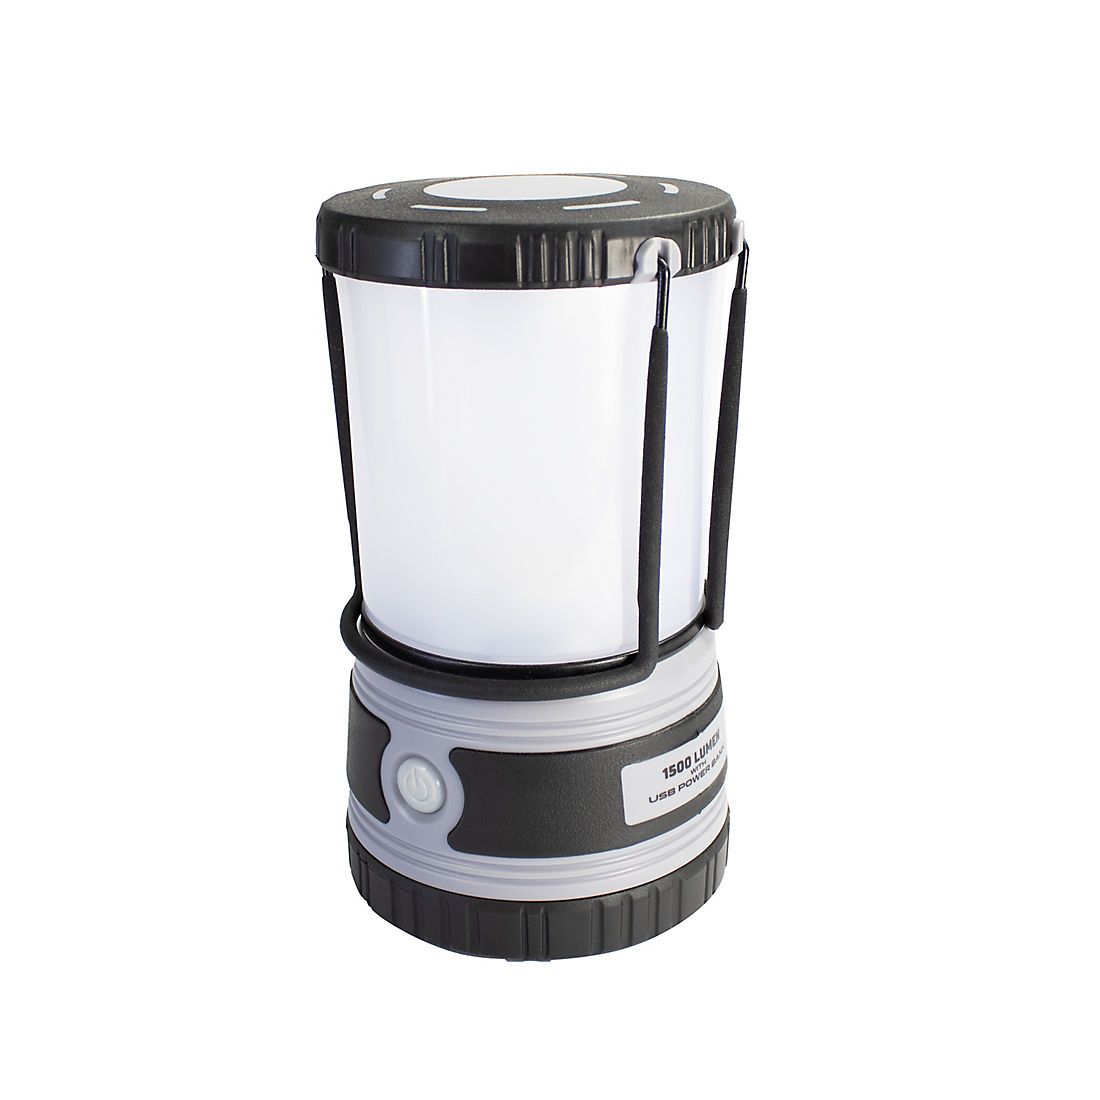 Police Security 1500 Lumen Ultra Bright LED Lantern with USB Charging Station, 4.5L x 4.5W x 8H